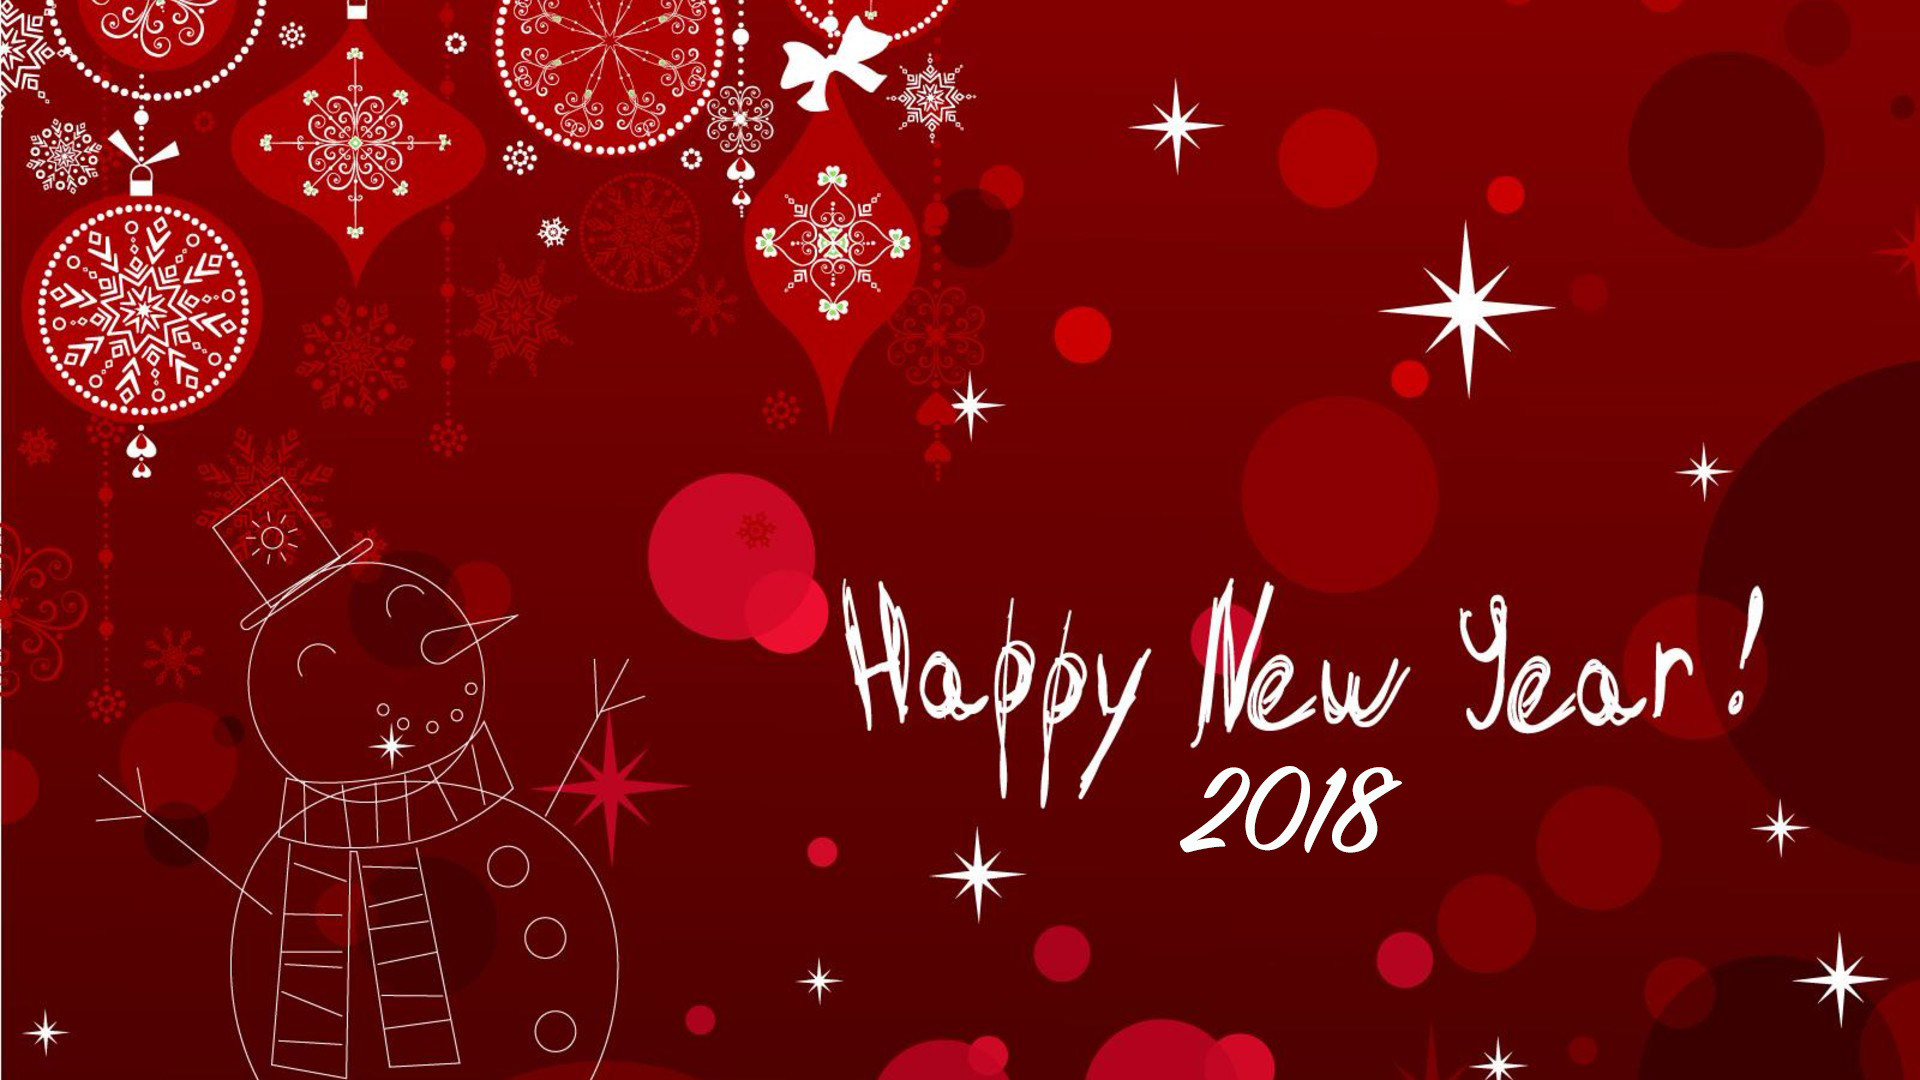 1920x1080 Happy New Year Wishes 2018 Wallpaper Widescreen